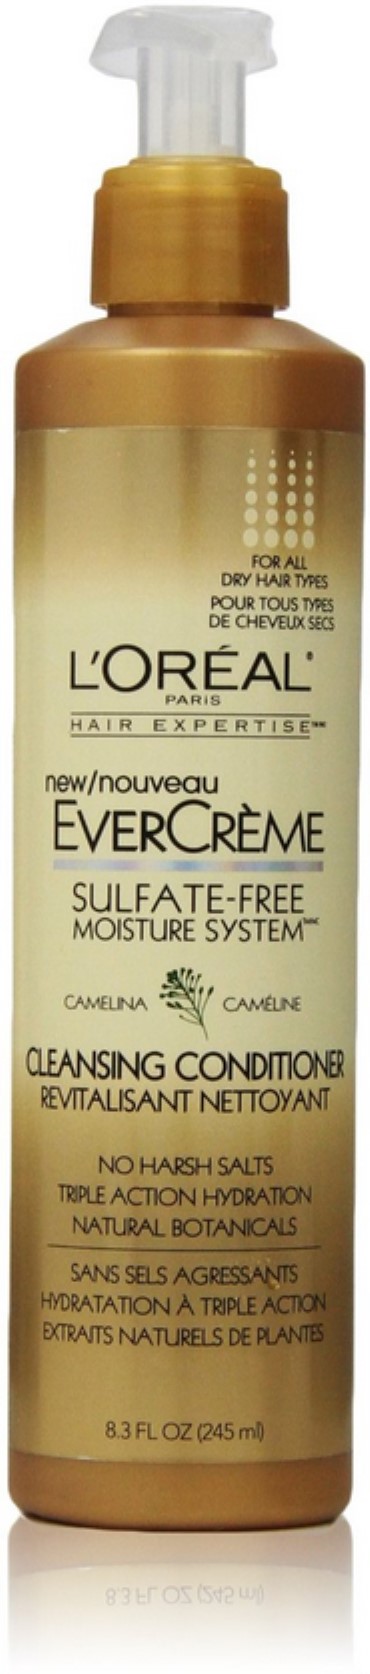 L'Oreal Paris Hair Expertise EverCreme Cleansing Conditioner 8.50 oz - image 1 of 1